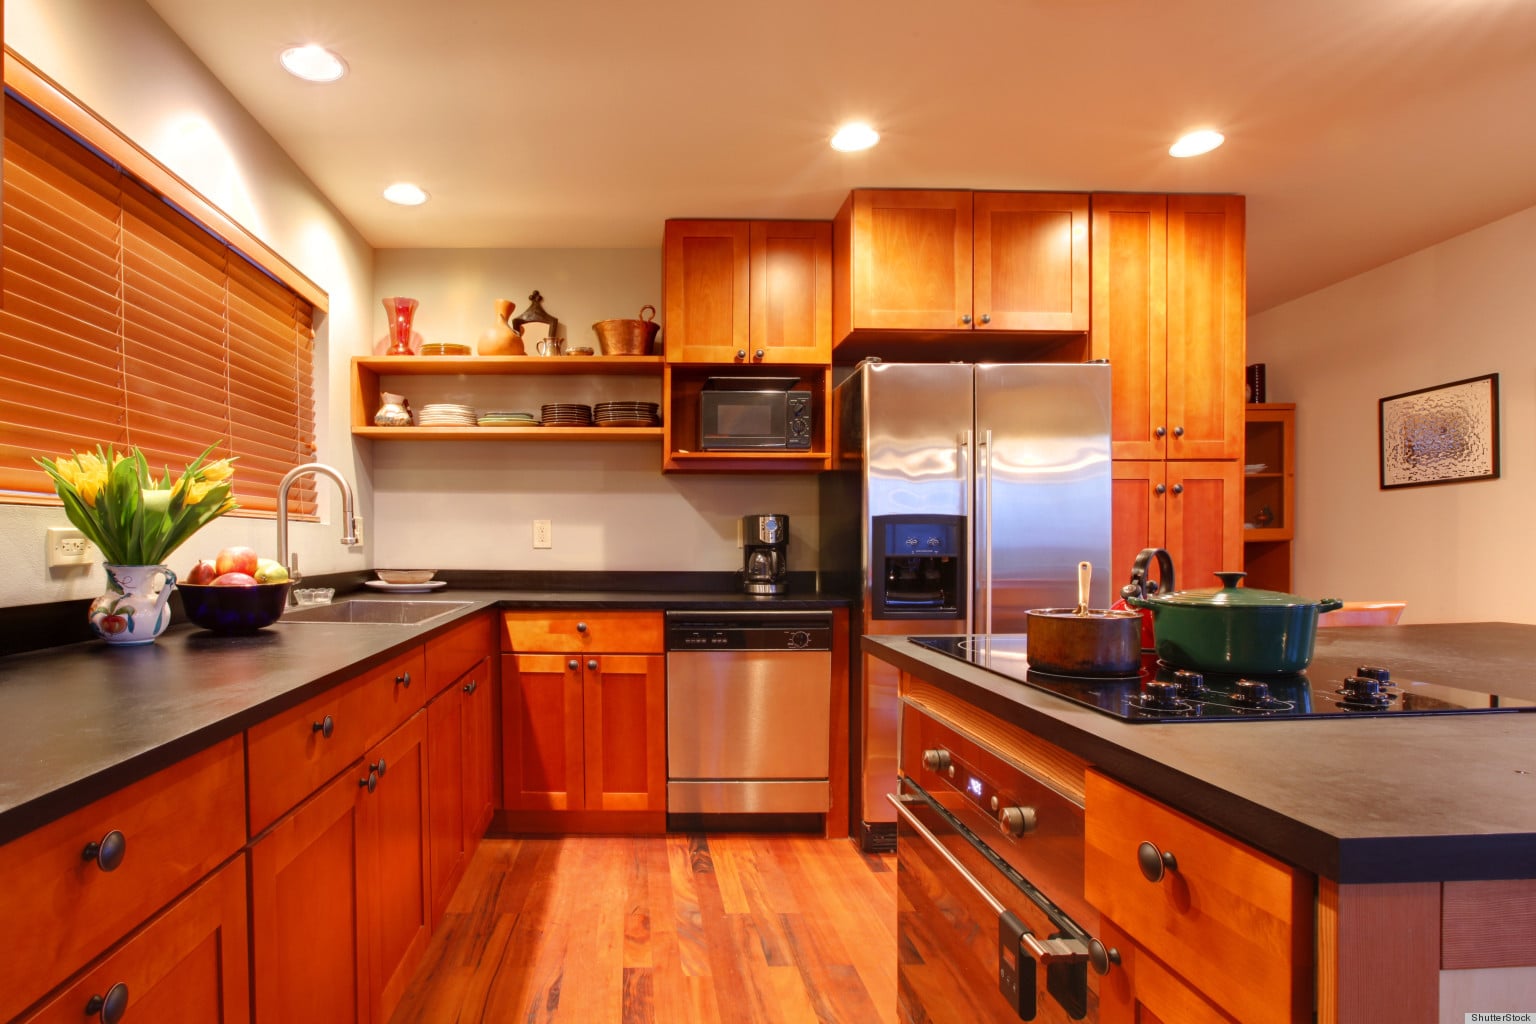 How Deep Are Kitchen Cabinets